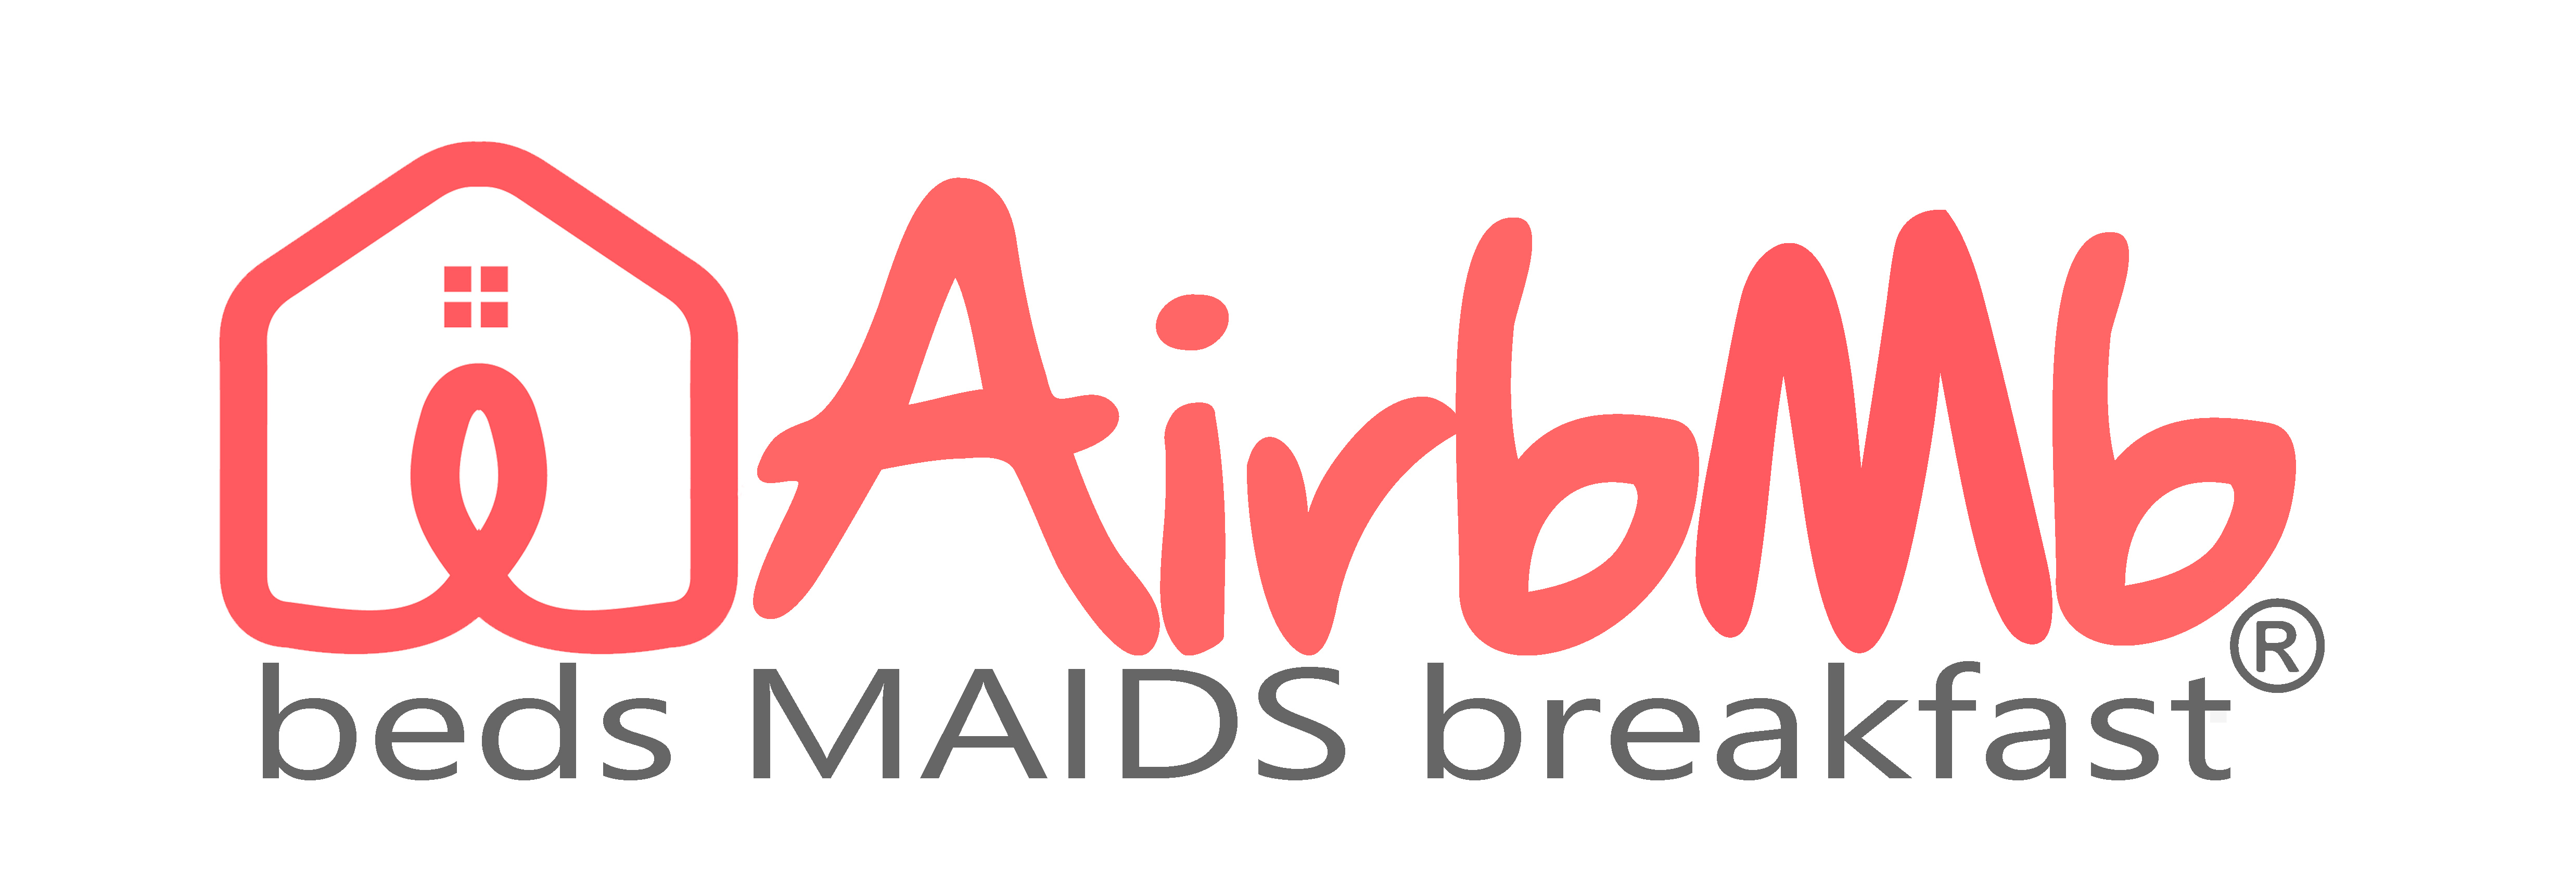 Airbmb Maids